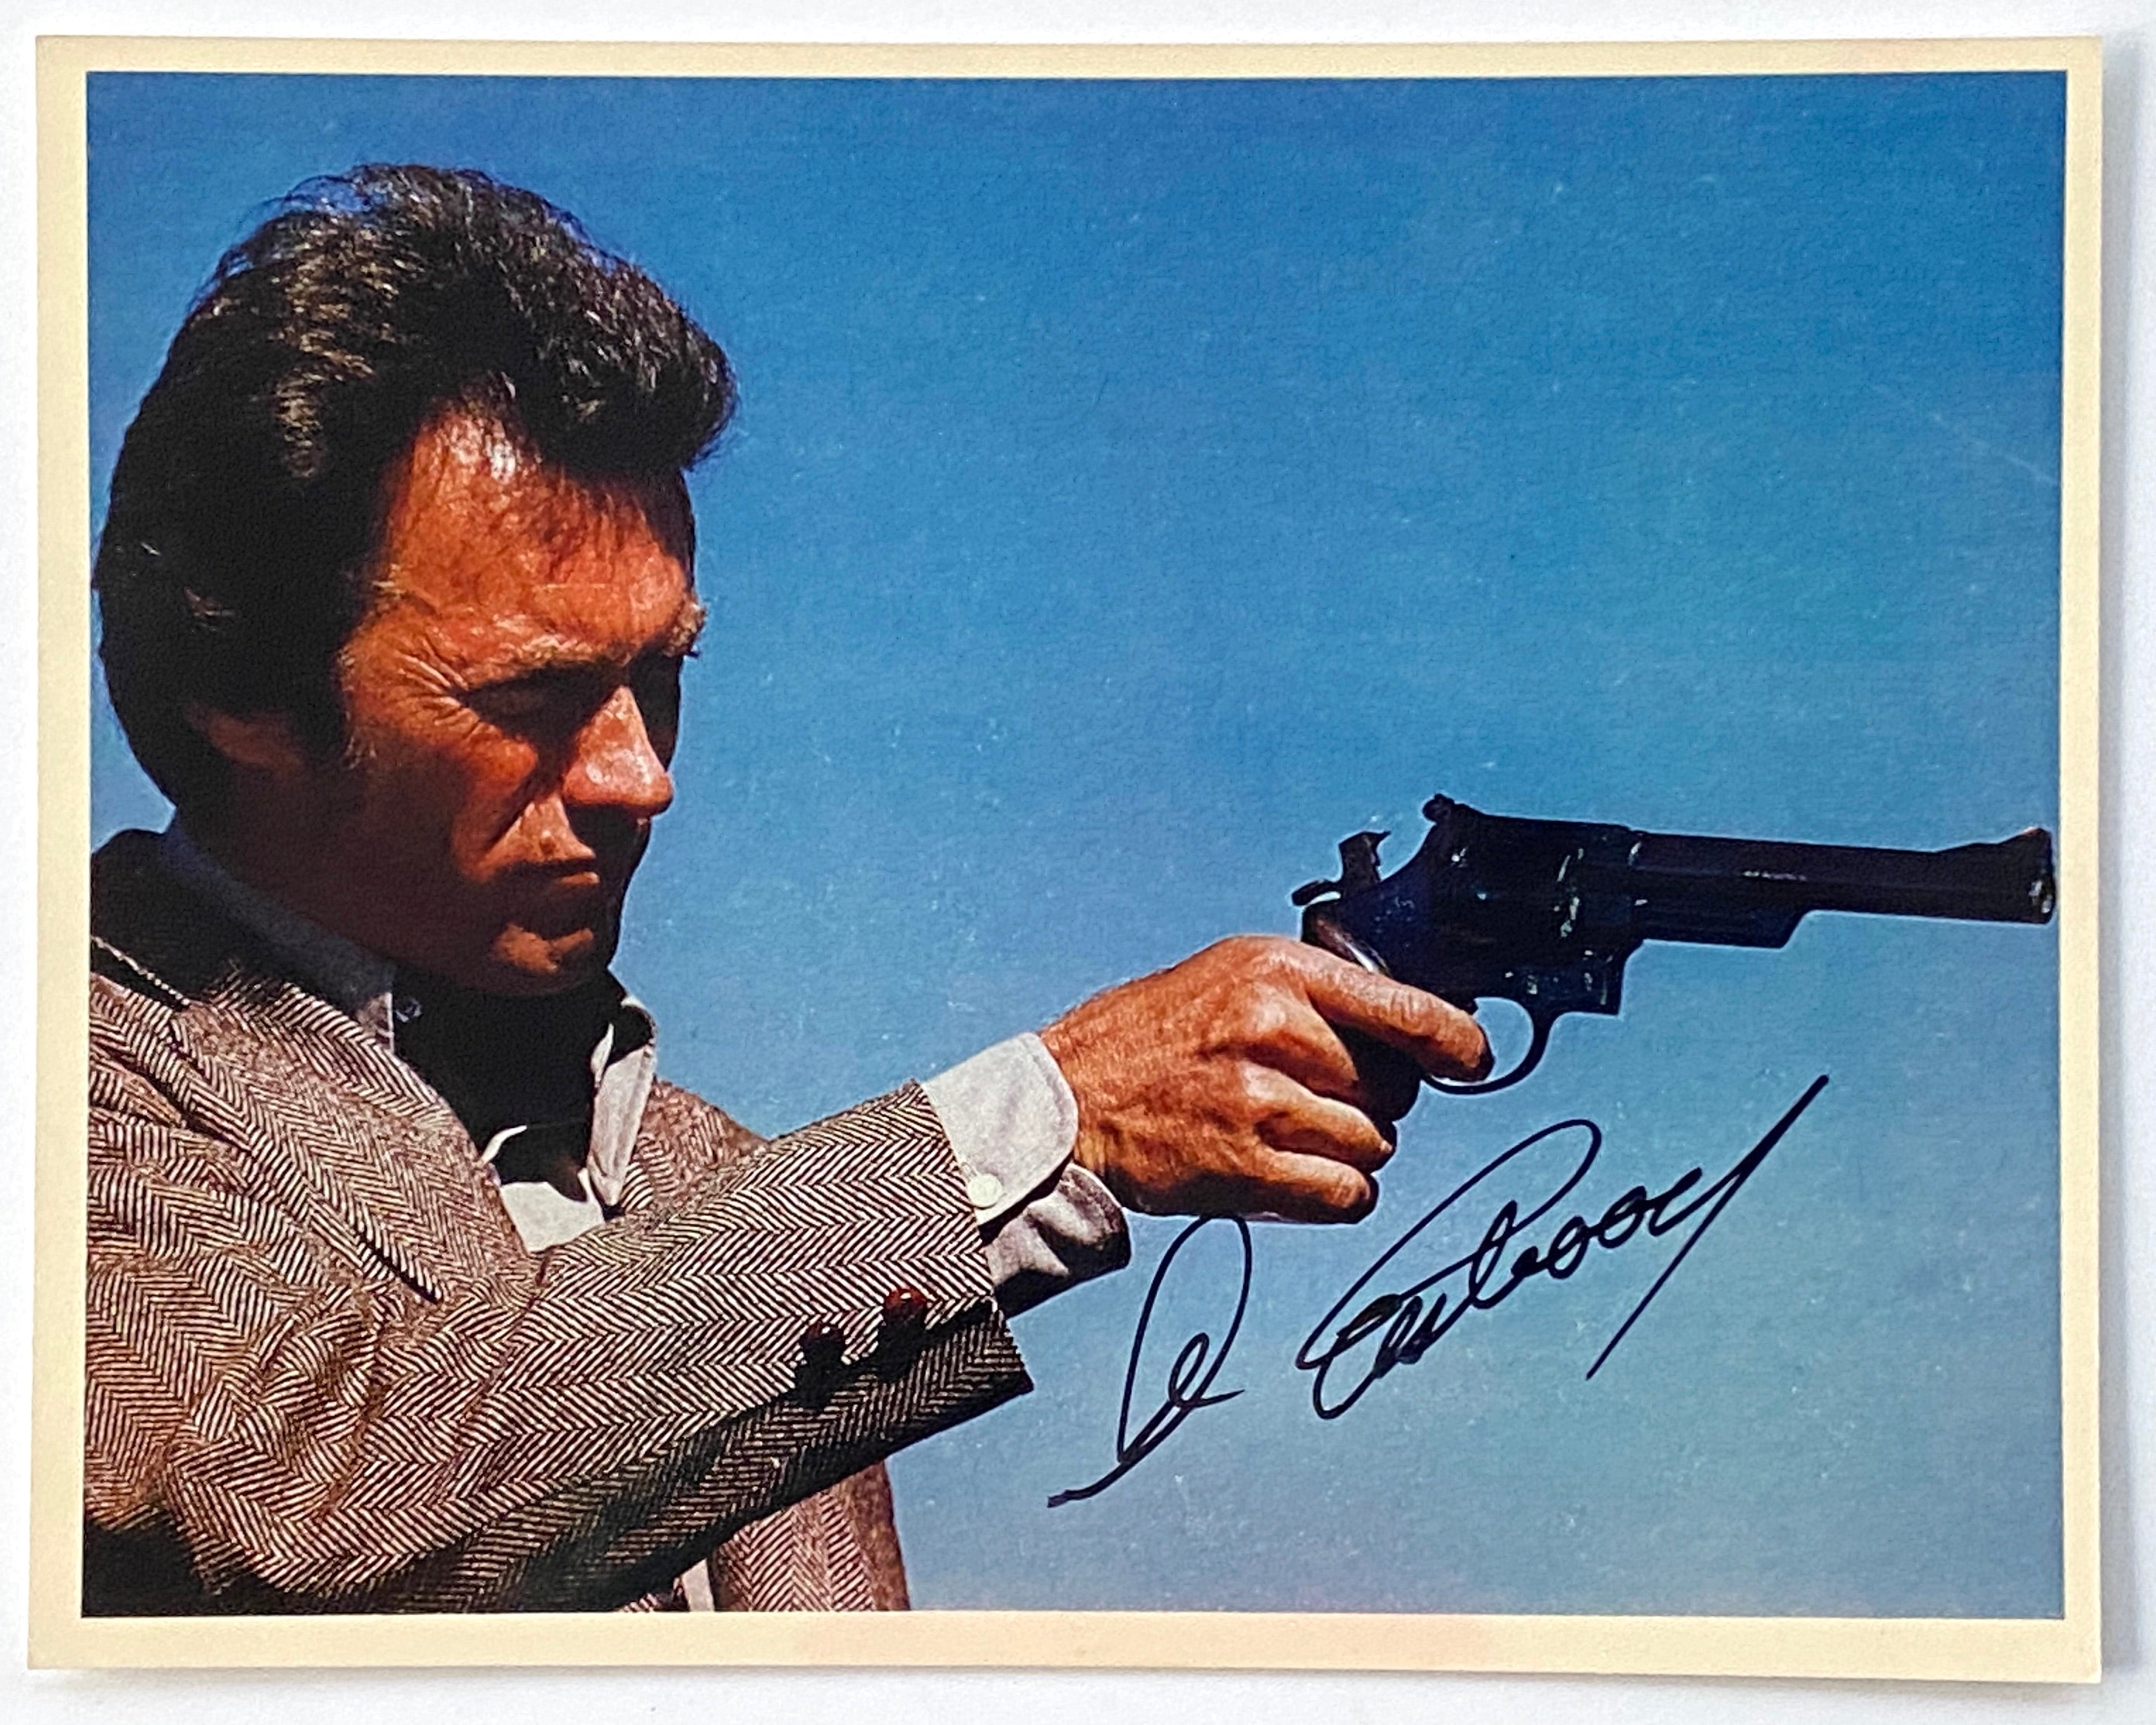 CLINT EASTWOOD Autograph IN-PERSON Signed 10 x 8 Photo JSA Authentic